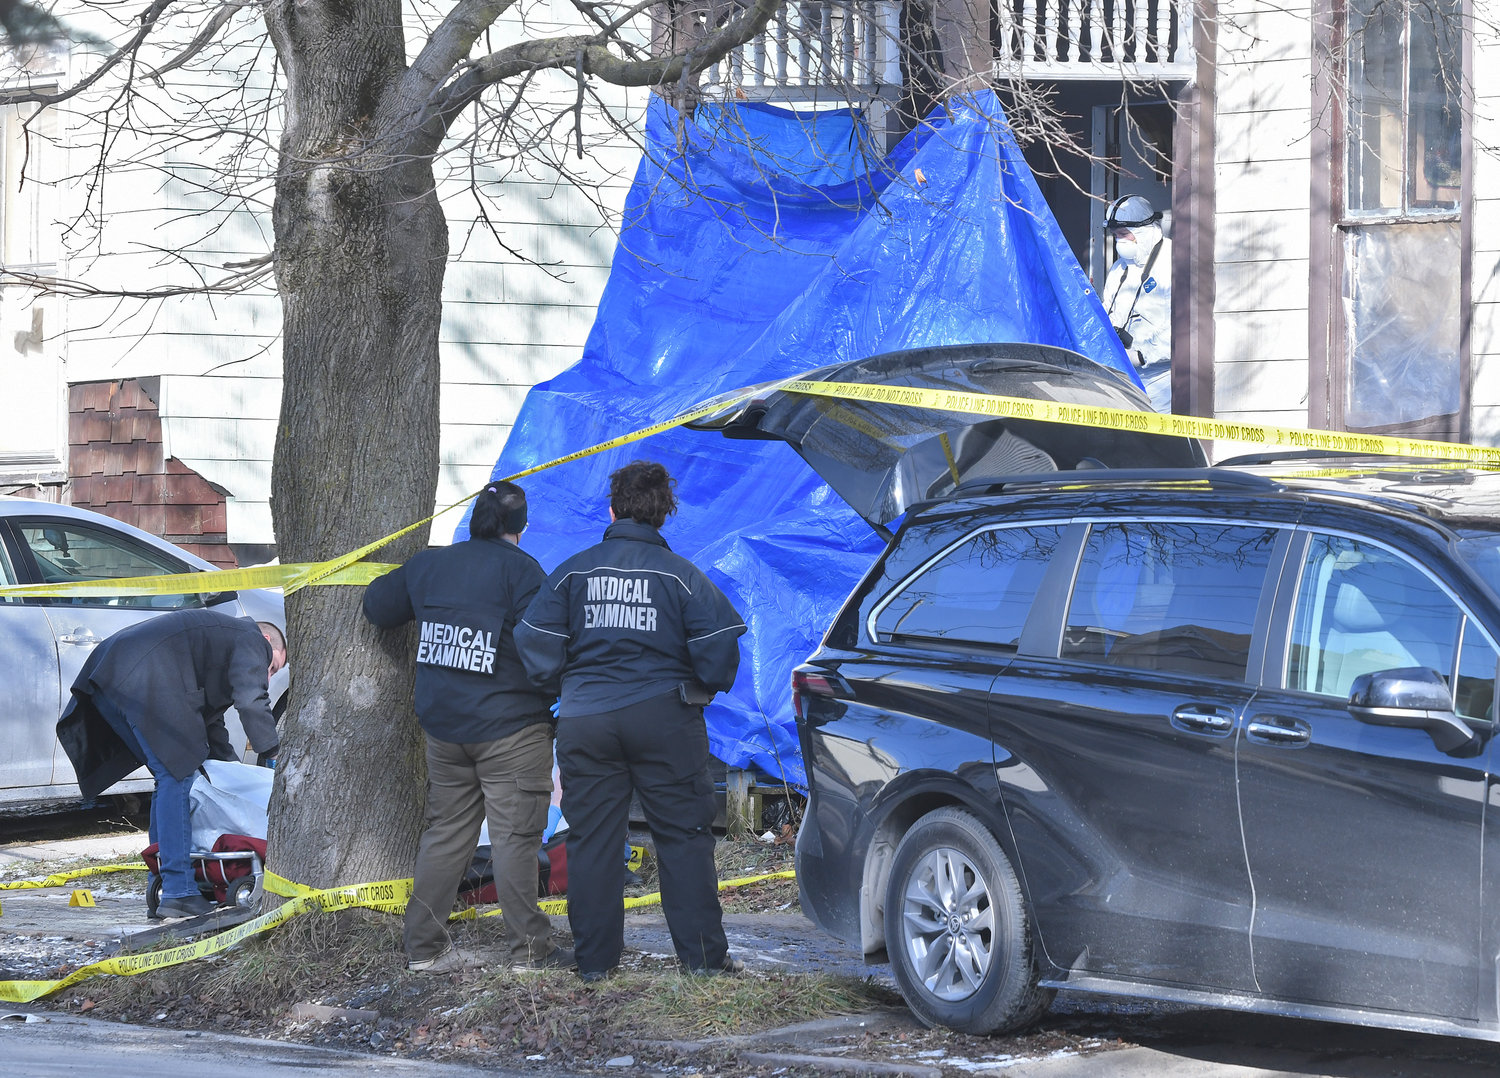 A homicide victim killed on Eagle Street in Utica on Wednesday is removed from the scene. Members of the Onondaga County Medical Examiner's Office look on after having examined the body and the scene.